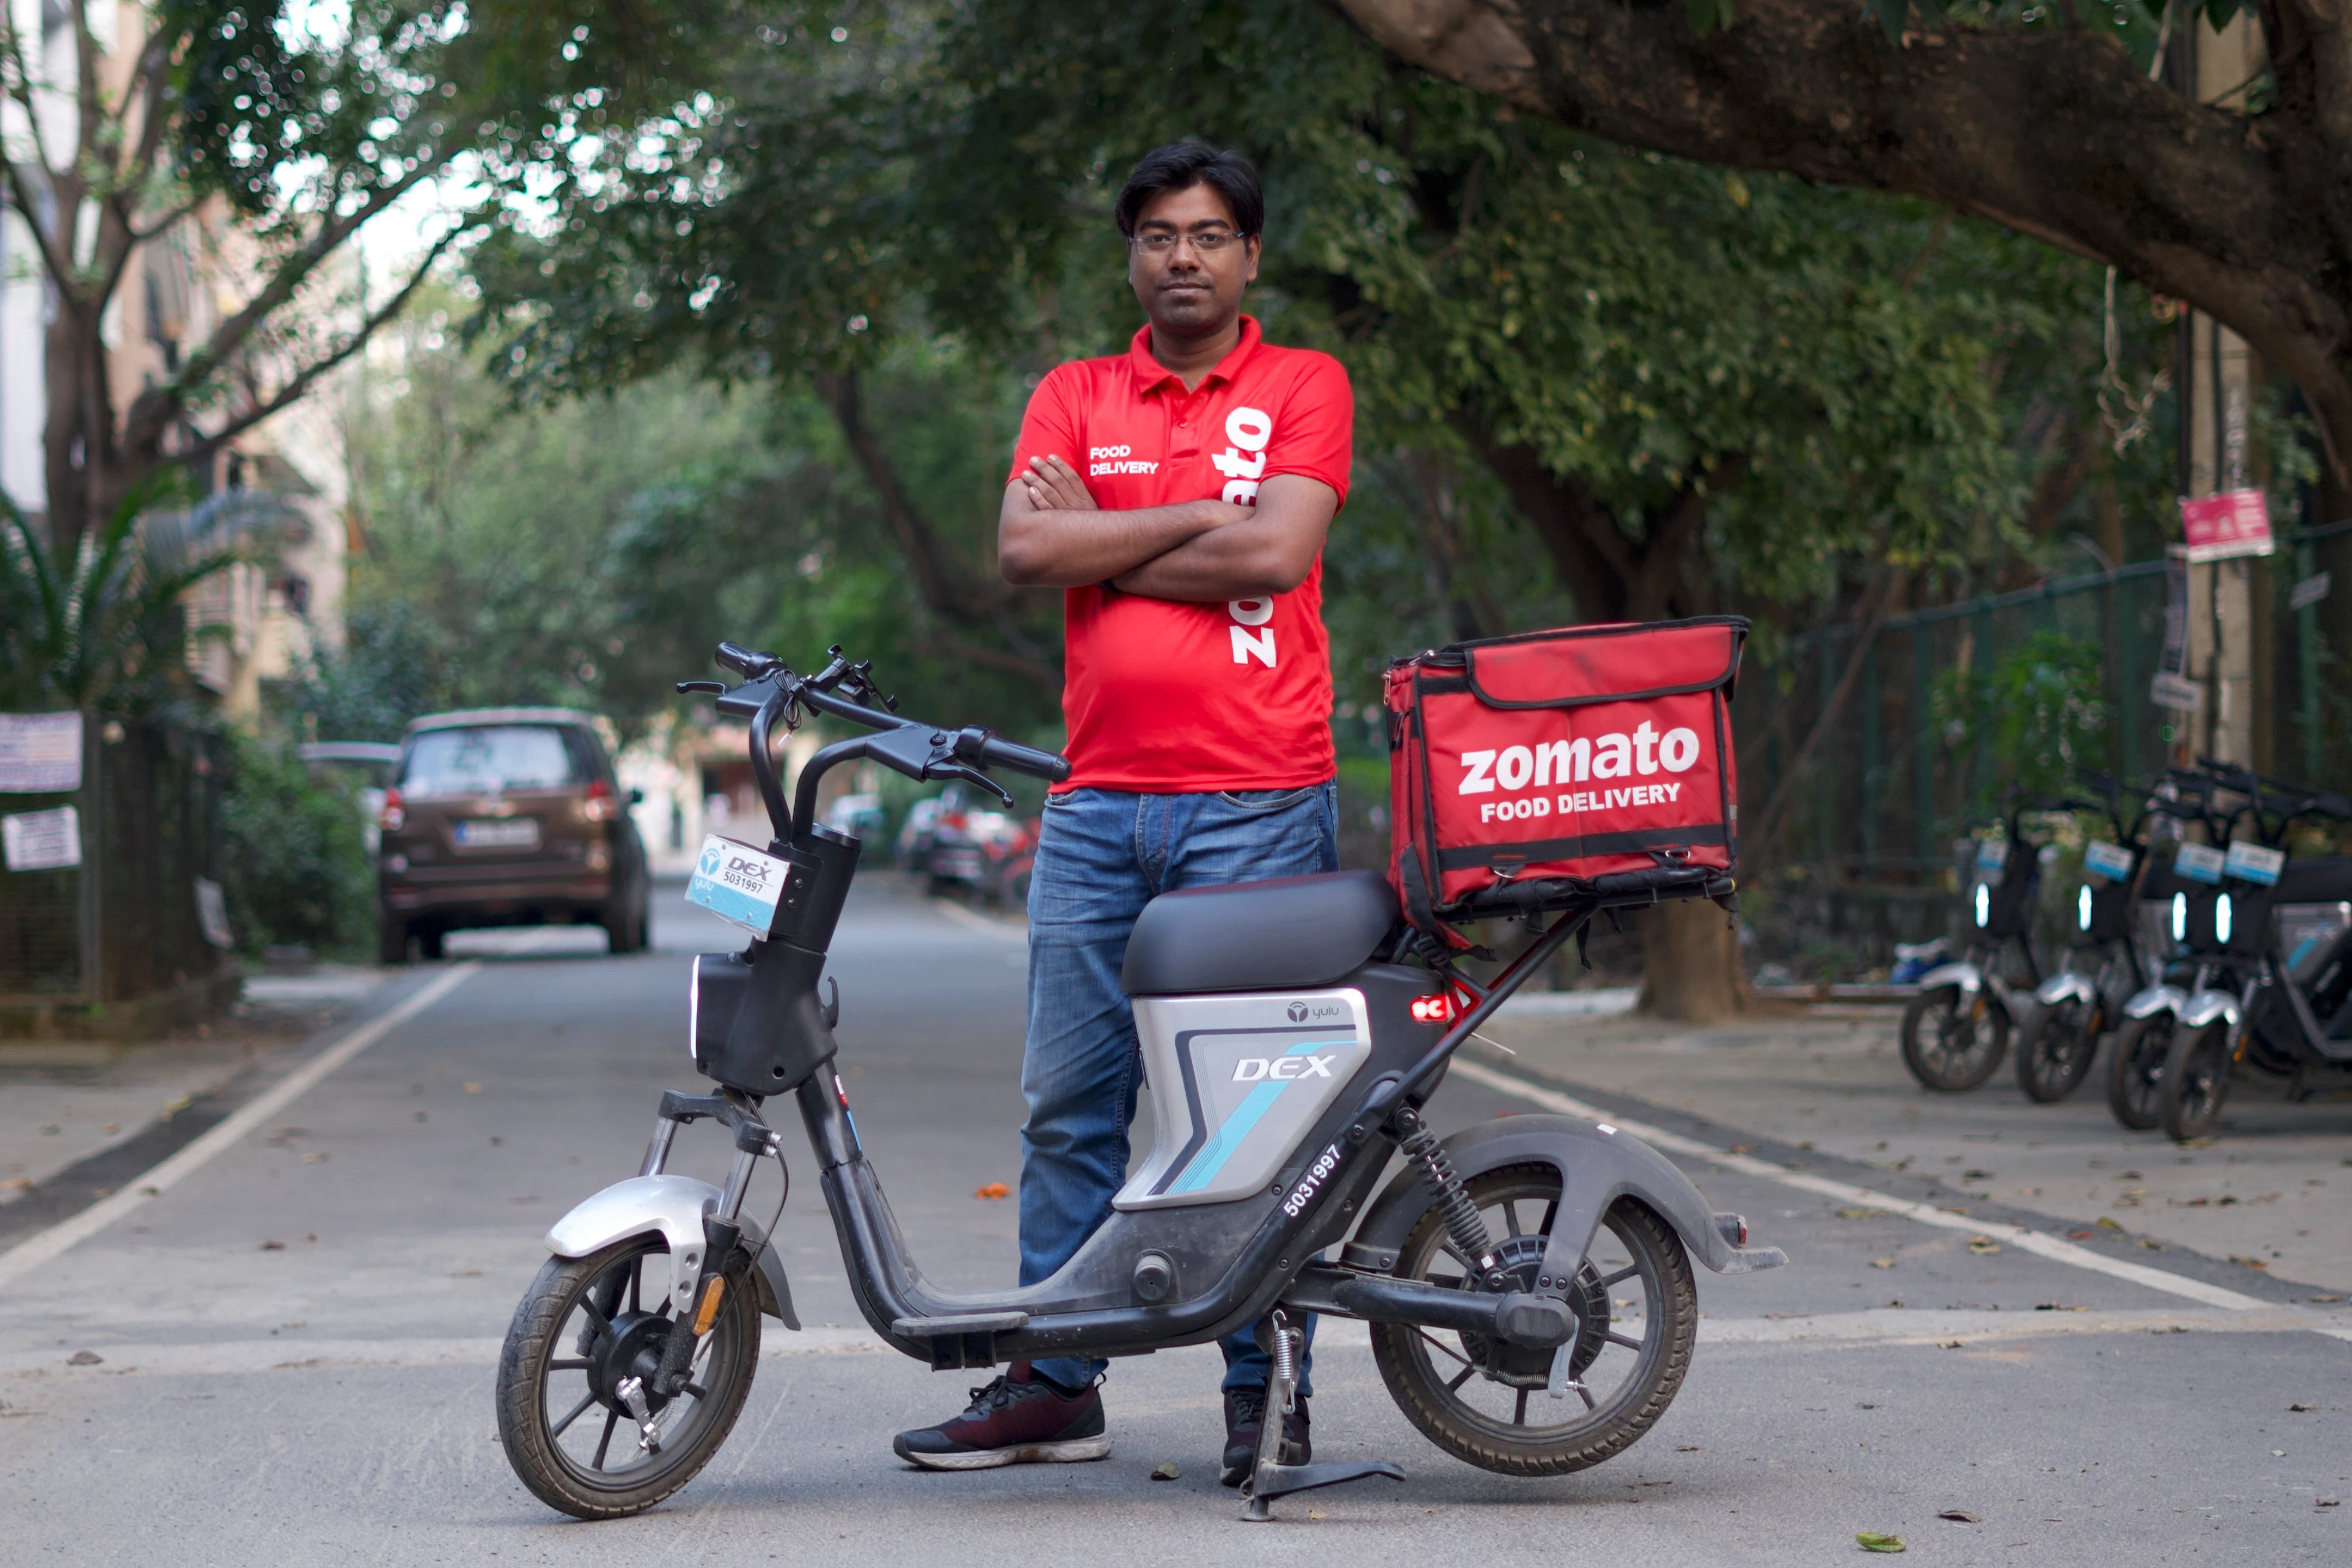 Yulu and Zomato Join Hands to Make Last-Mile Deliveries Green